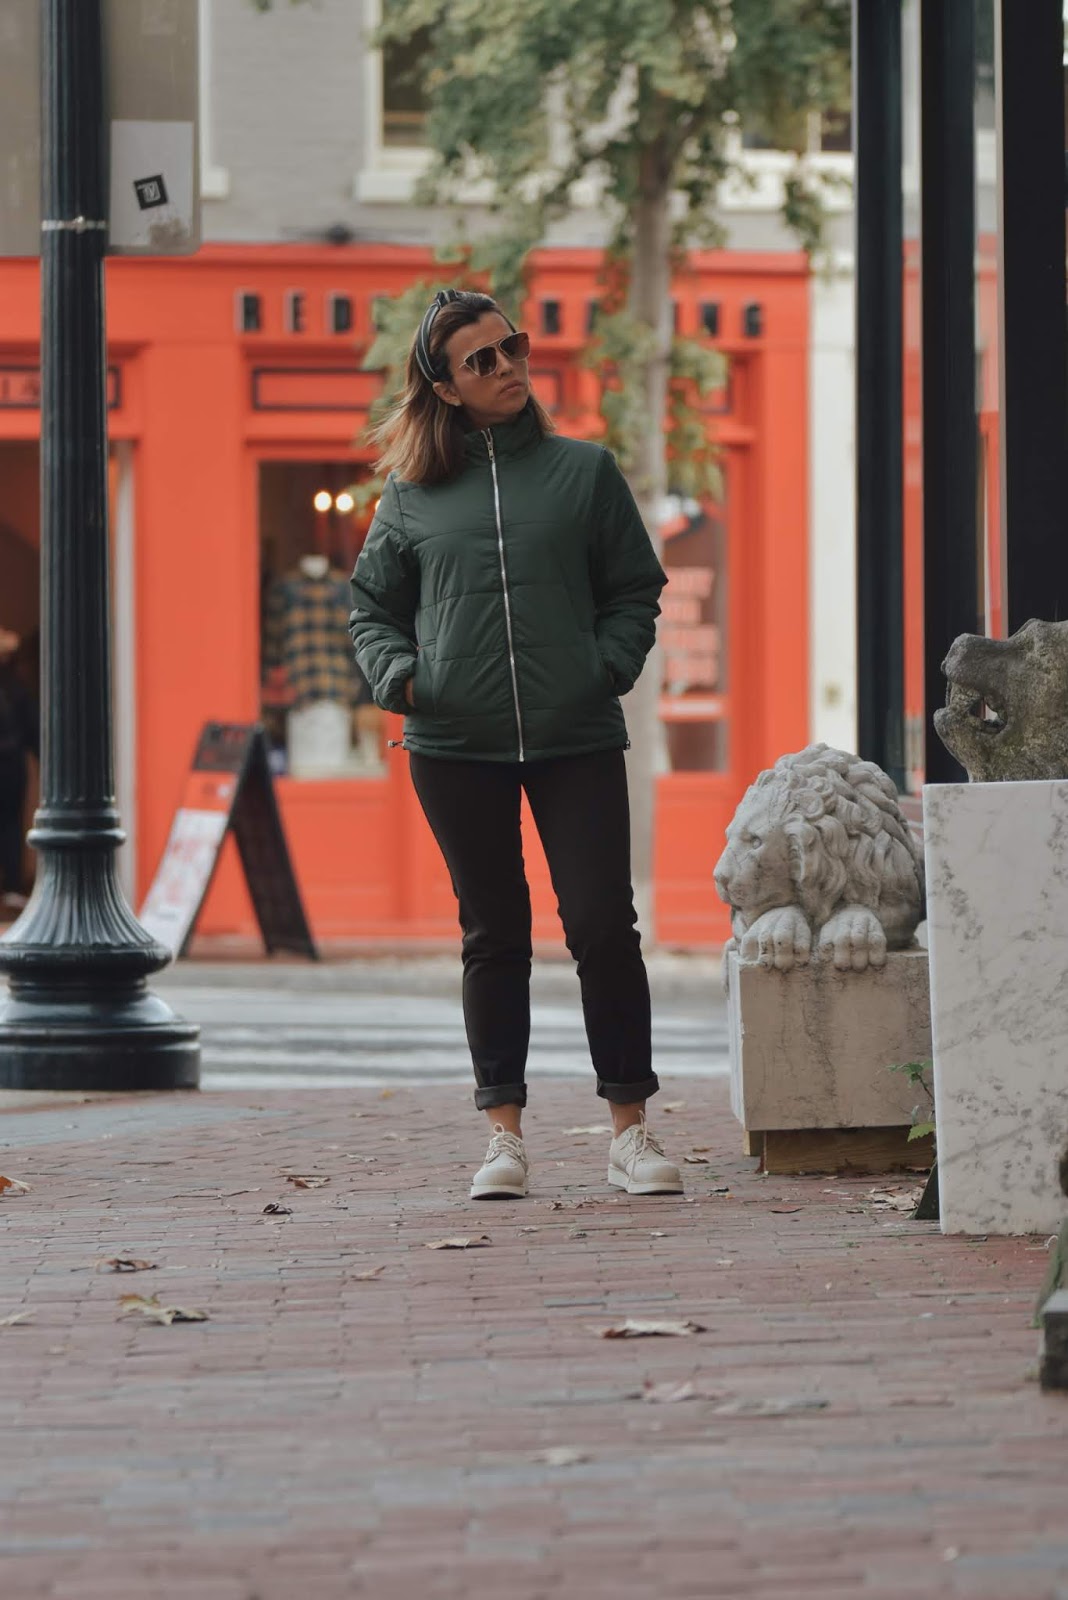 Army Green Quilted Zip-Up Puffer Parka Jacket-mariestilo-lookoftheday-dcblogger-streetstyle-fashionblogger-lookbook store-lbsdaily-moda-